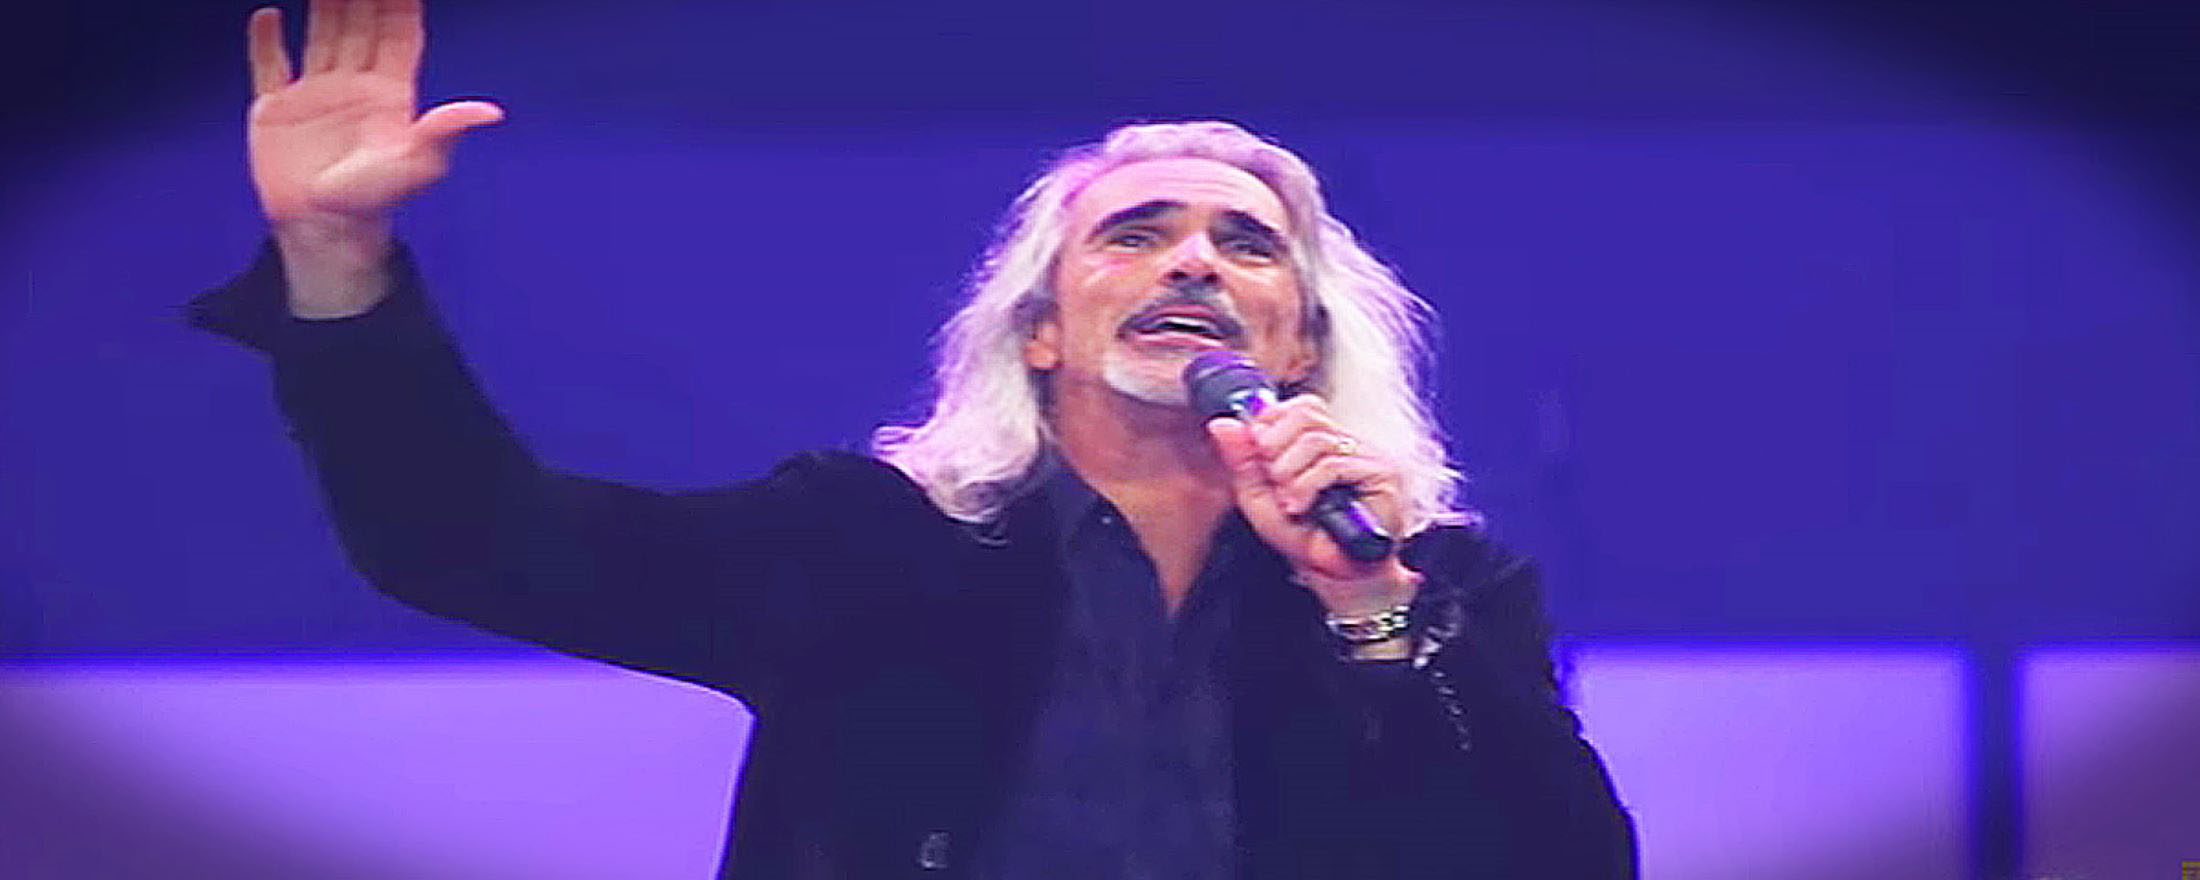 Image for Guy Penrod Holiday Concert